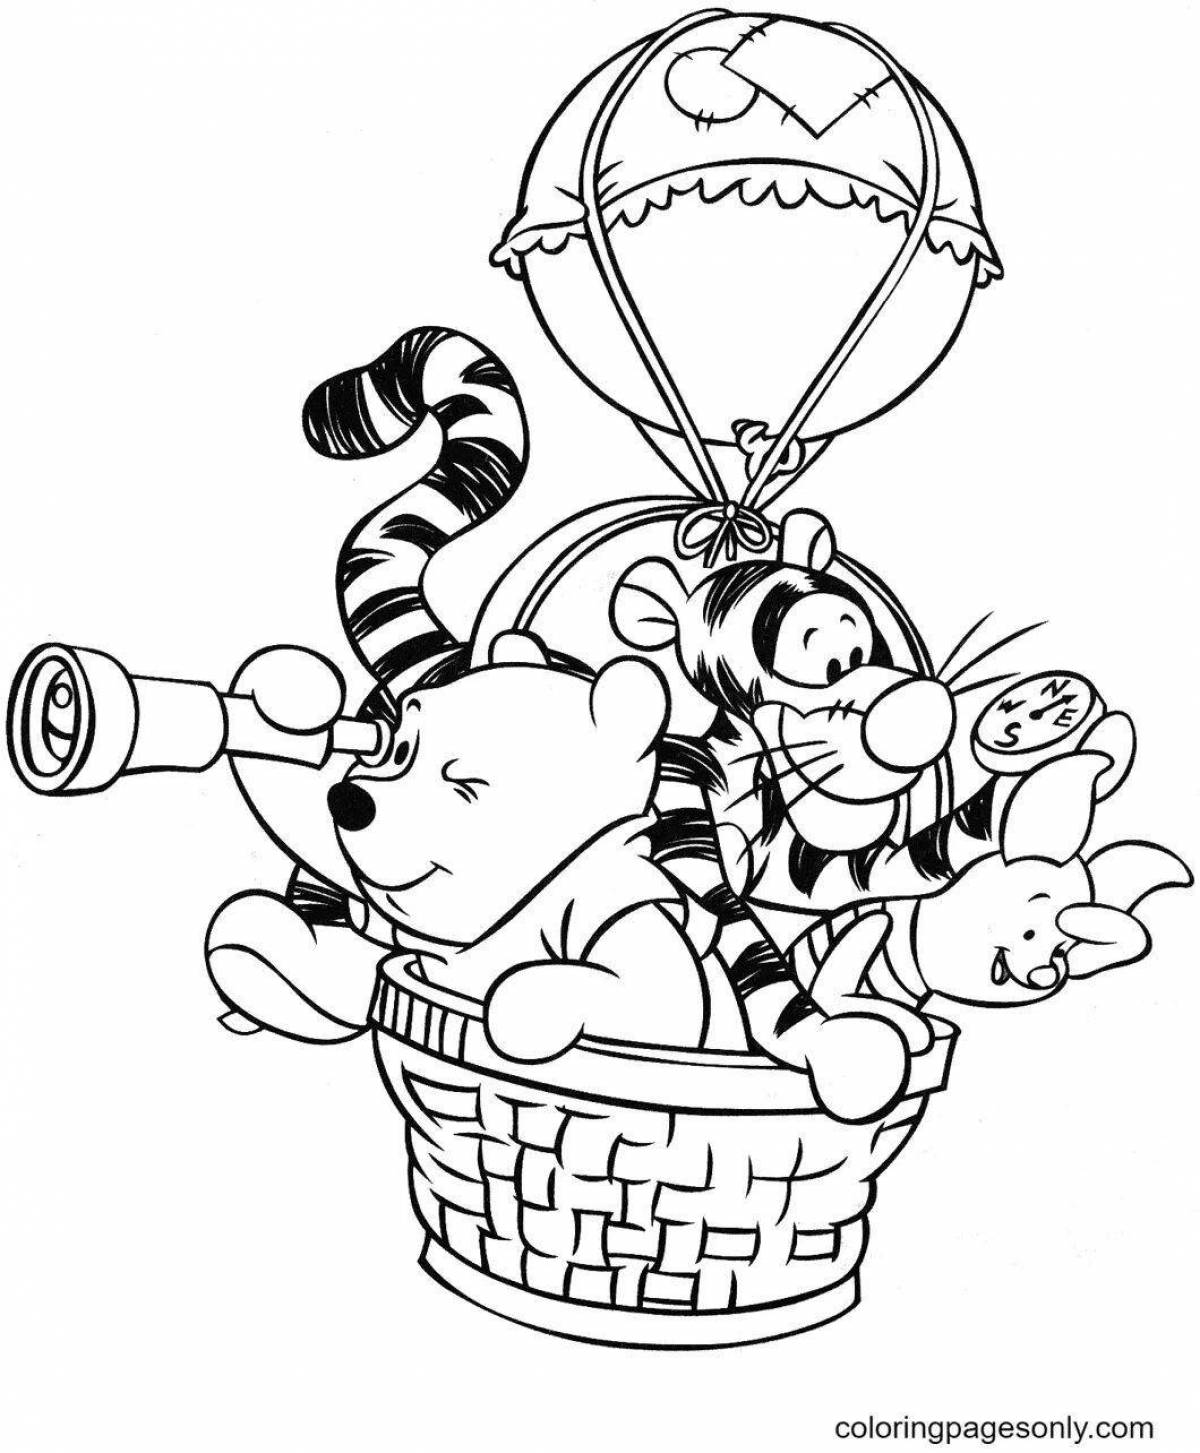 Coloring page grinning winnie the pooh and his friends